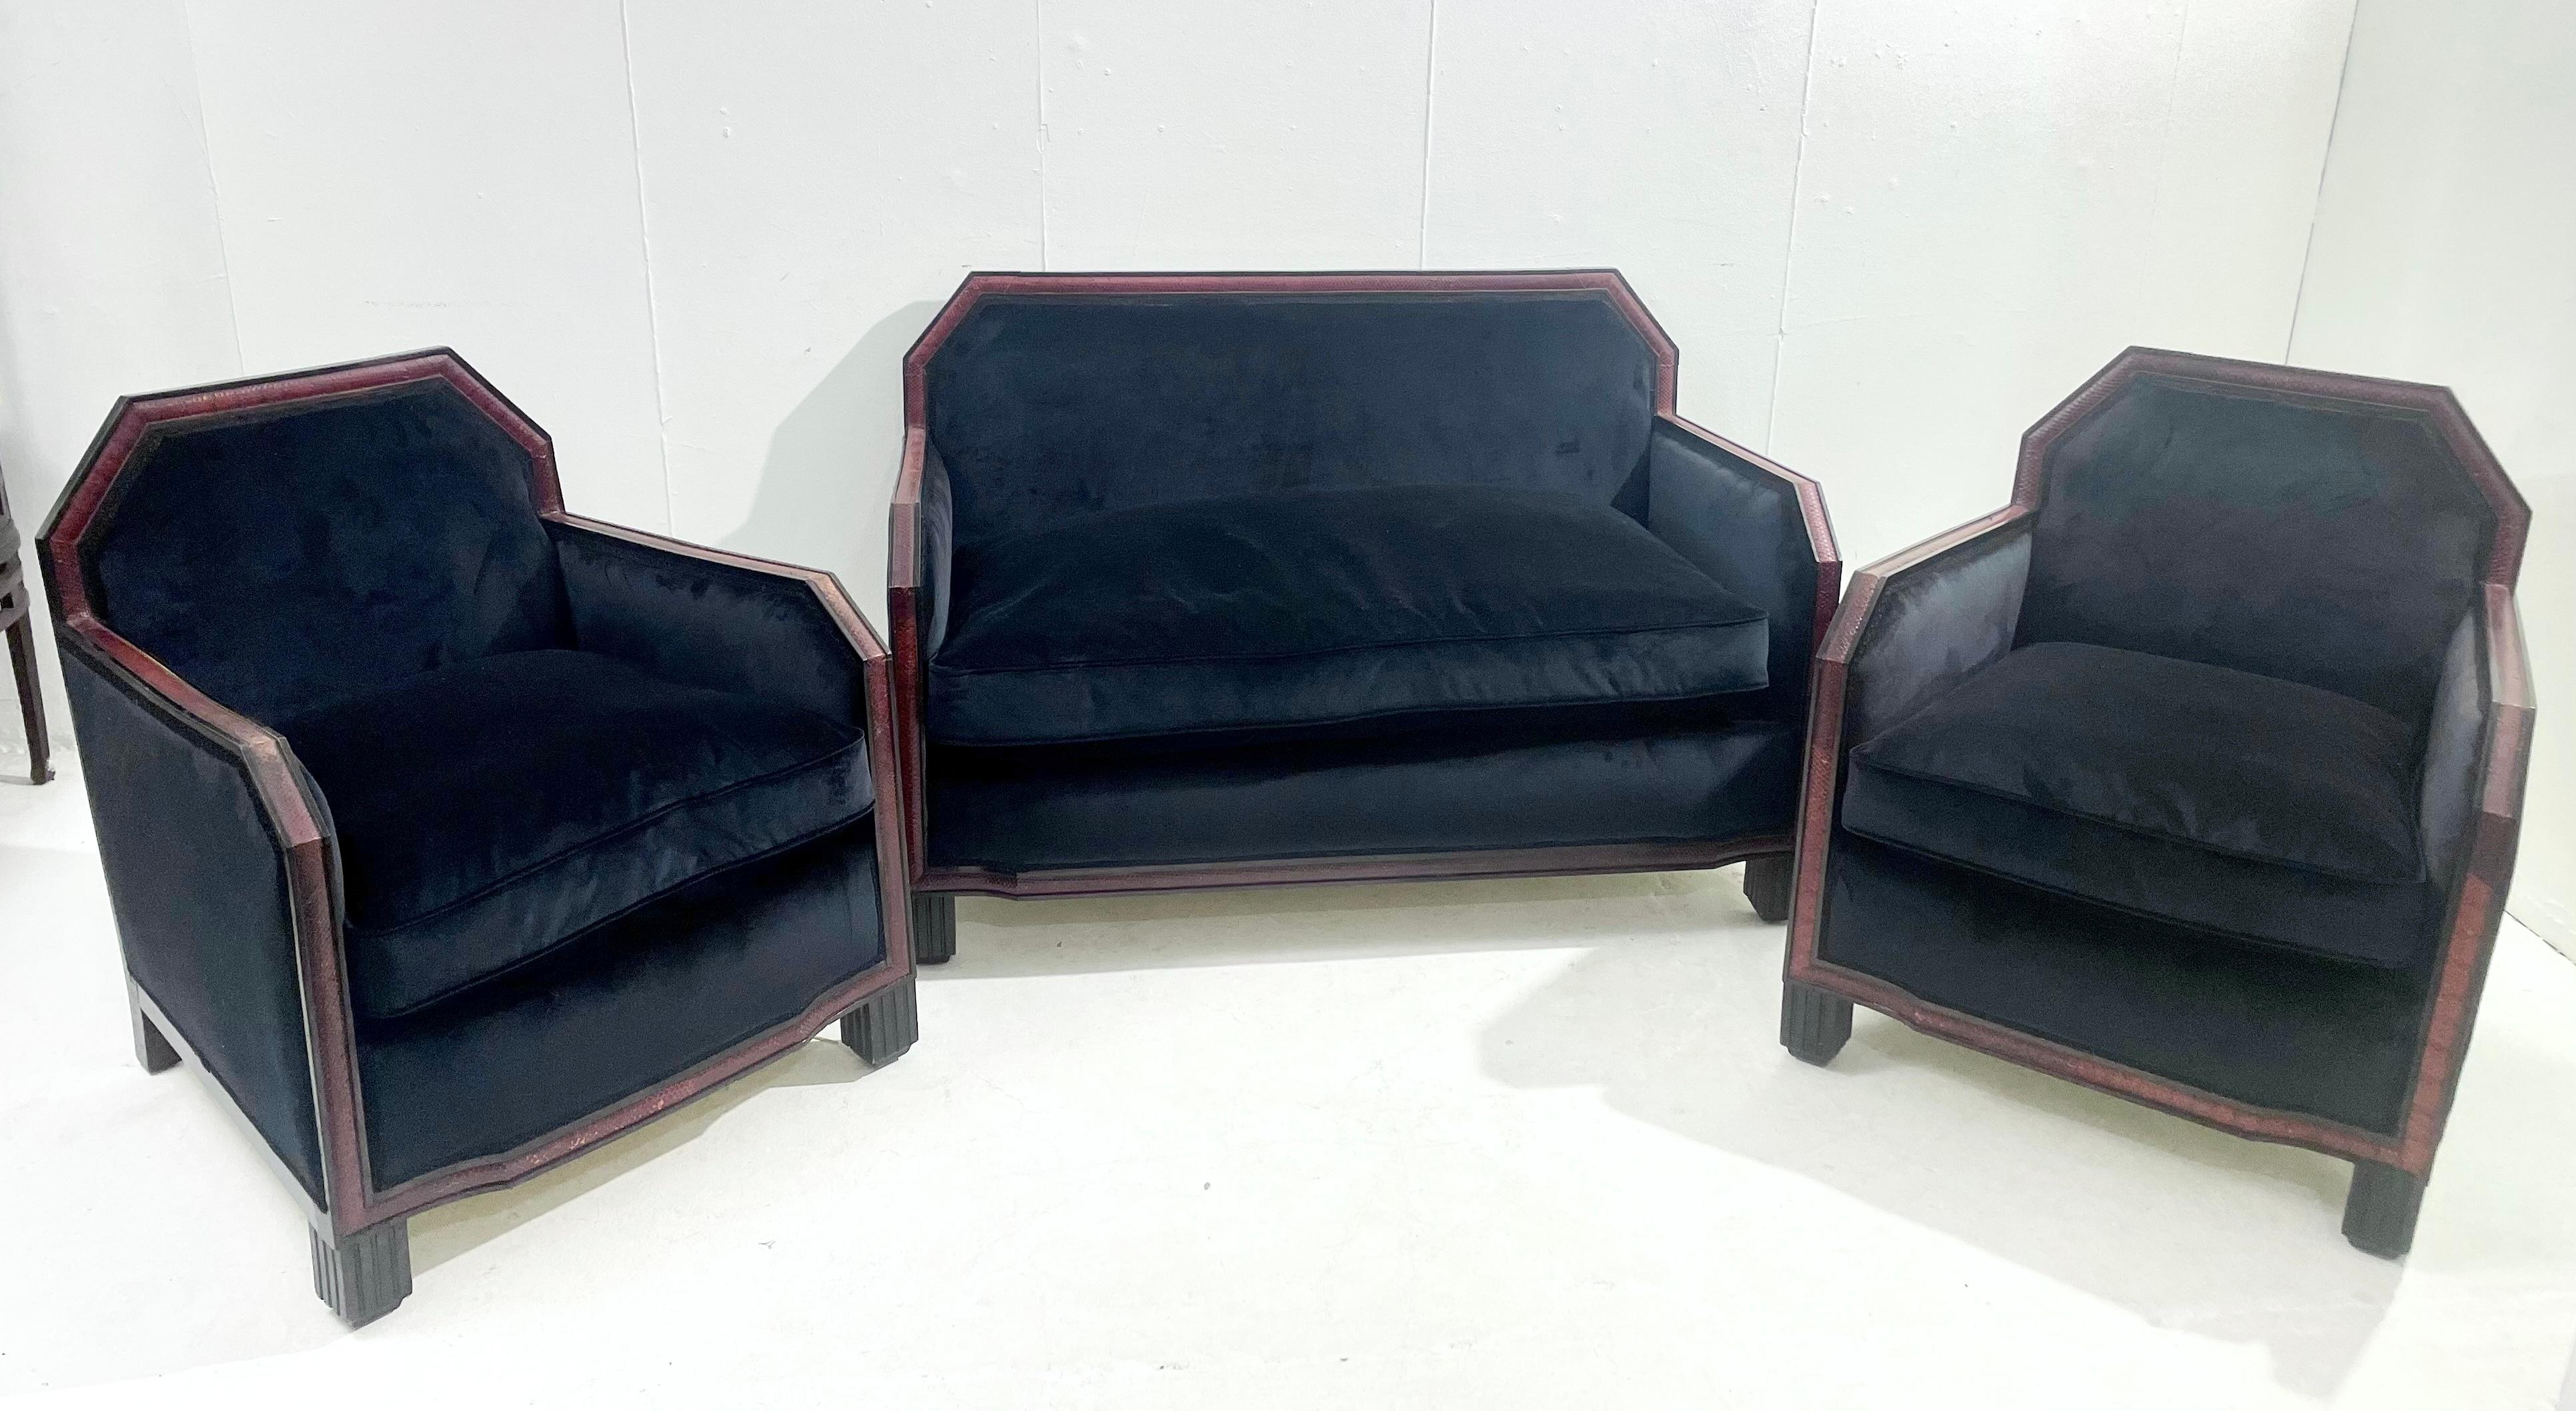 Mid-century Art Deco black velvet and red snake skin sofa and armchairs set - 1950s.